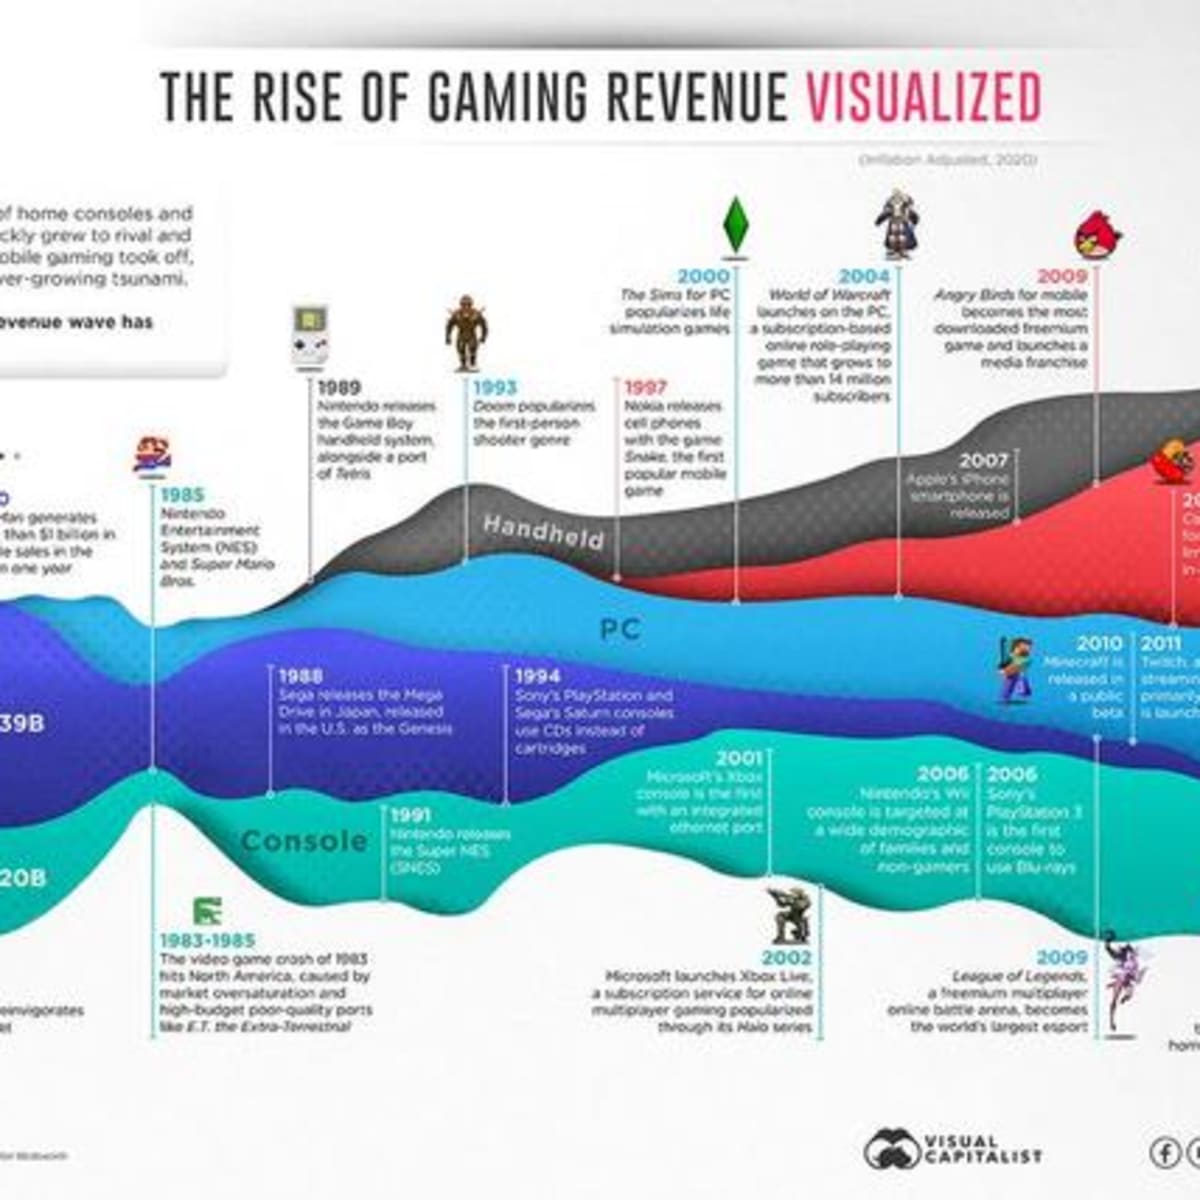 In Graphic Detail: The great gaming consolidation